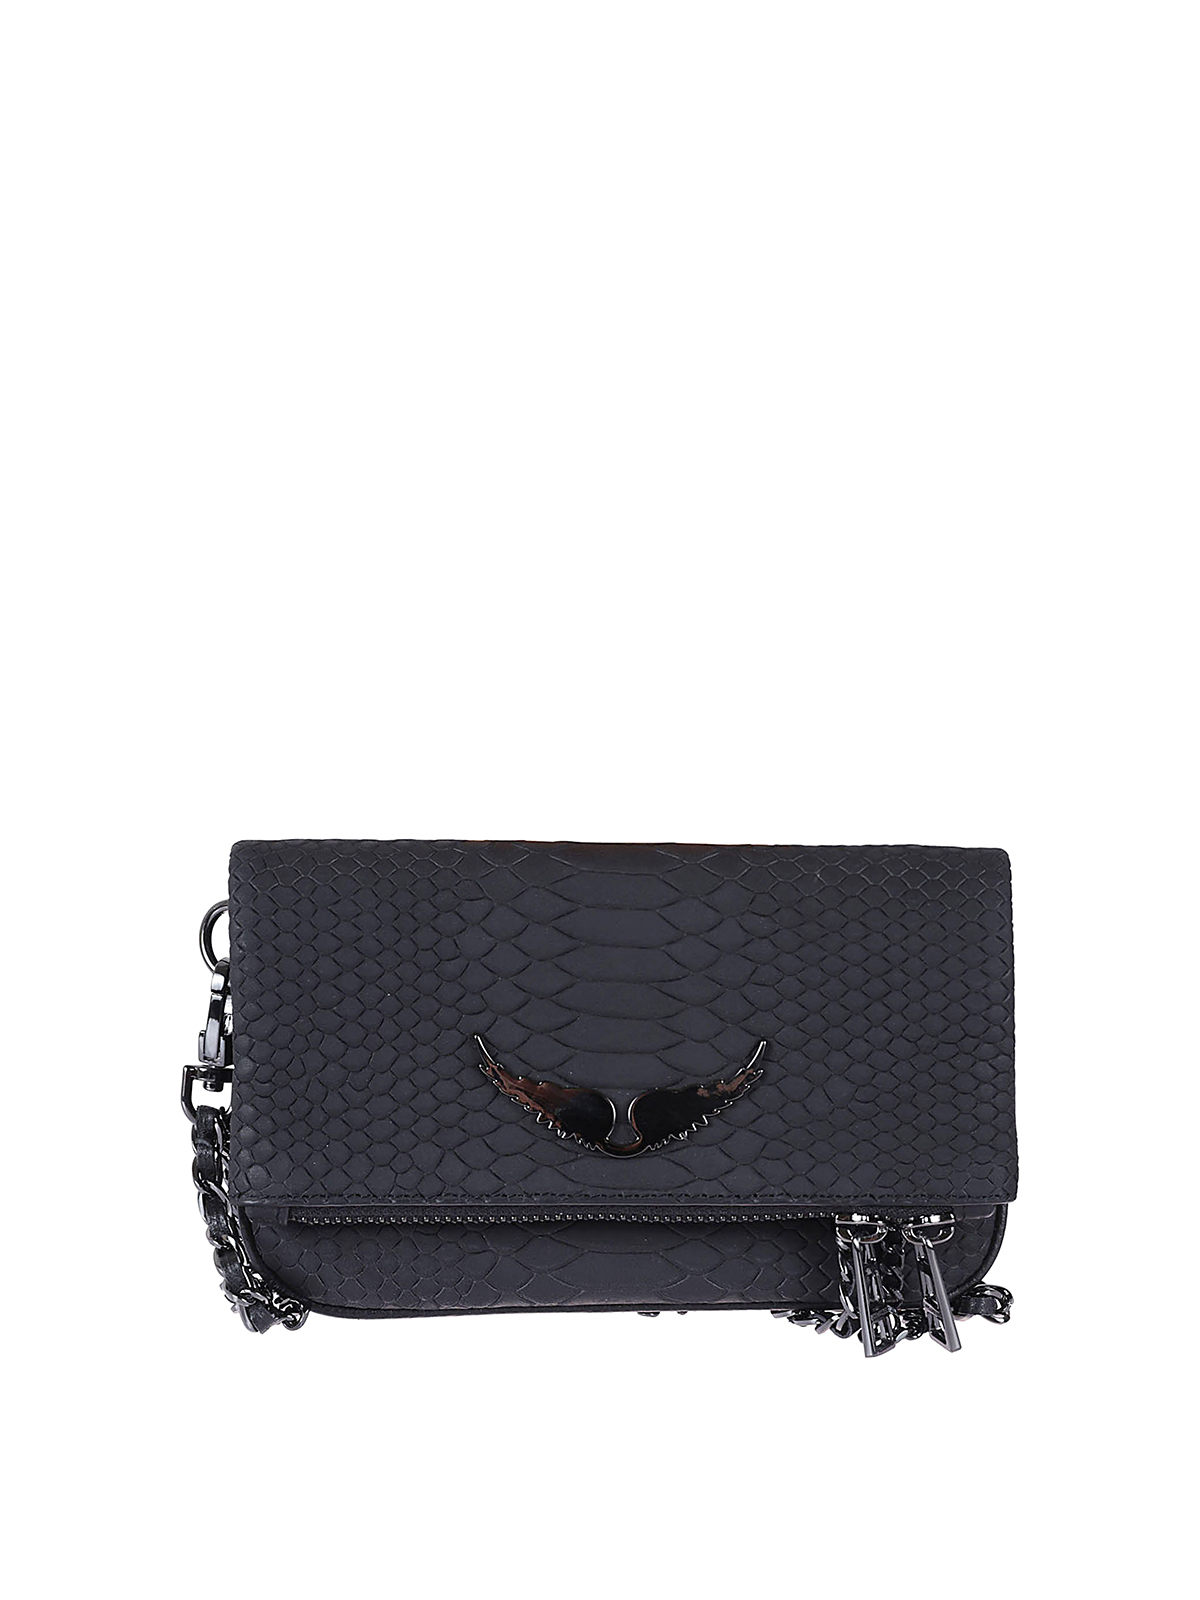 Zadig & Voltaire Reptile Print Leather Clutch Bag In Black